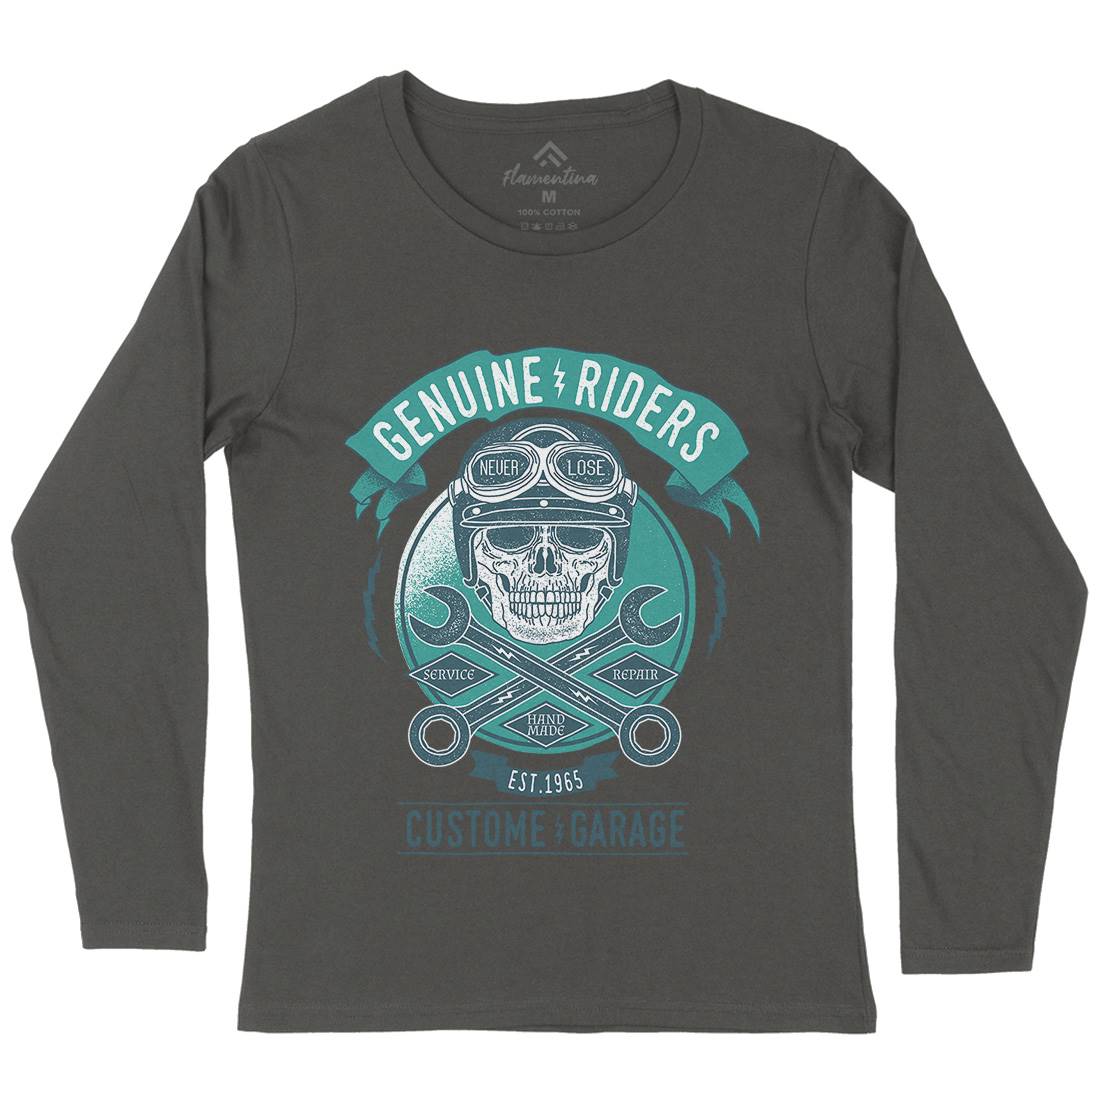 Genuine Riders Womens Long Sleeve T-Shirt Motorcycles A984